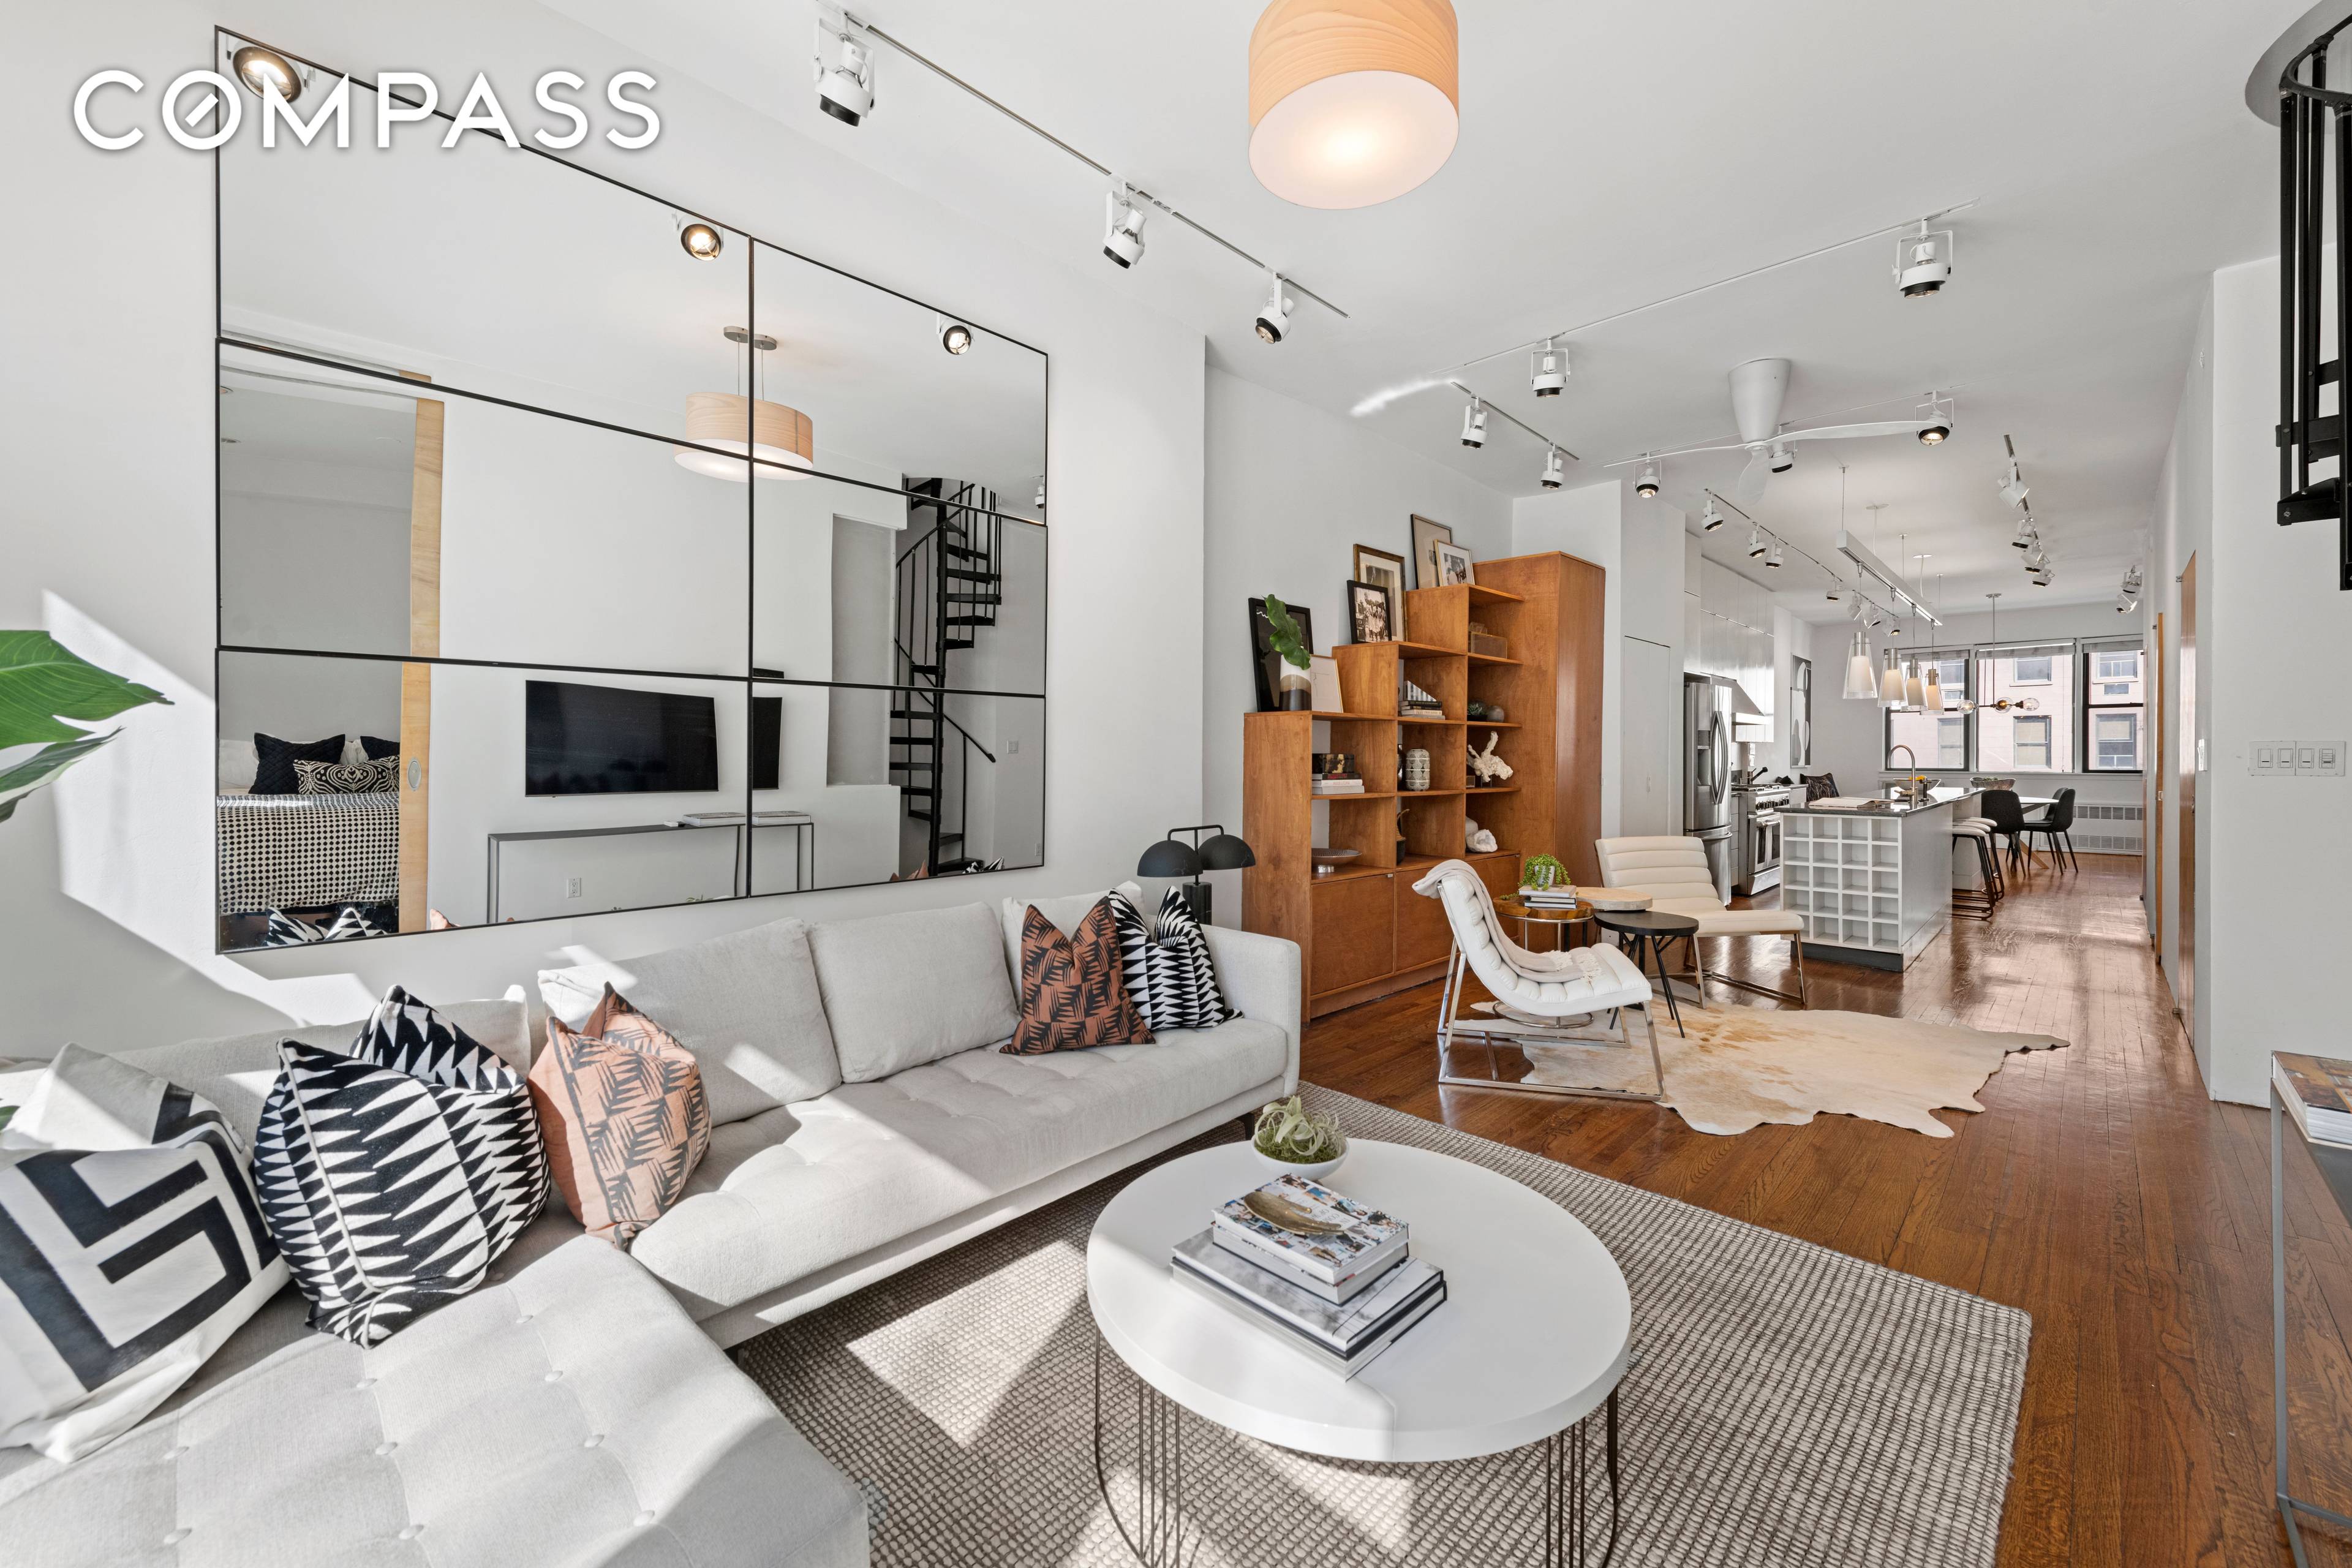 Gorgeous living space, private outdoor space and the perfect East Village location make this sprawling, legal four bedroom, three bathroom duplex co op an irresistible Downtown sanctuary.